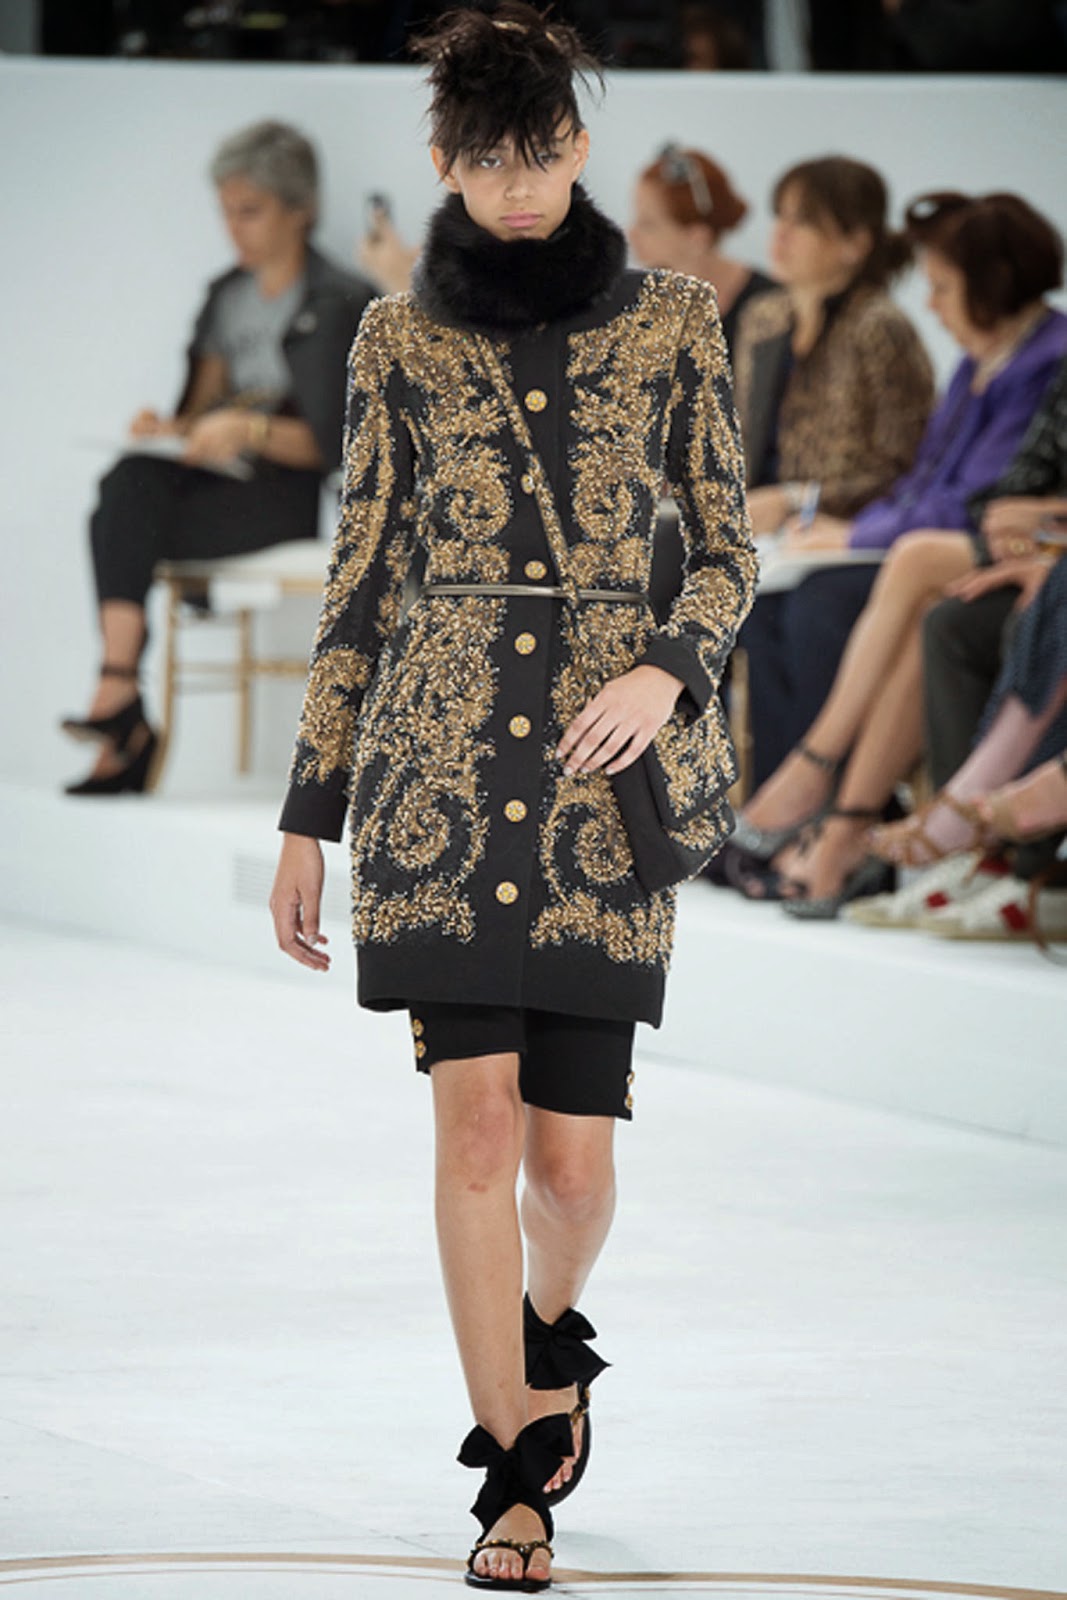 Runway Report: Chanel Fall 2014 Couture – If I Was A Stylist